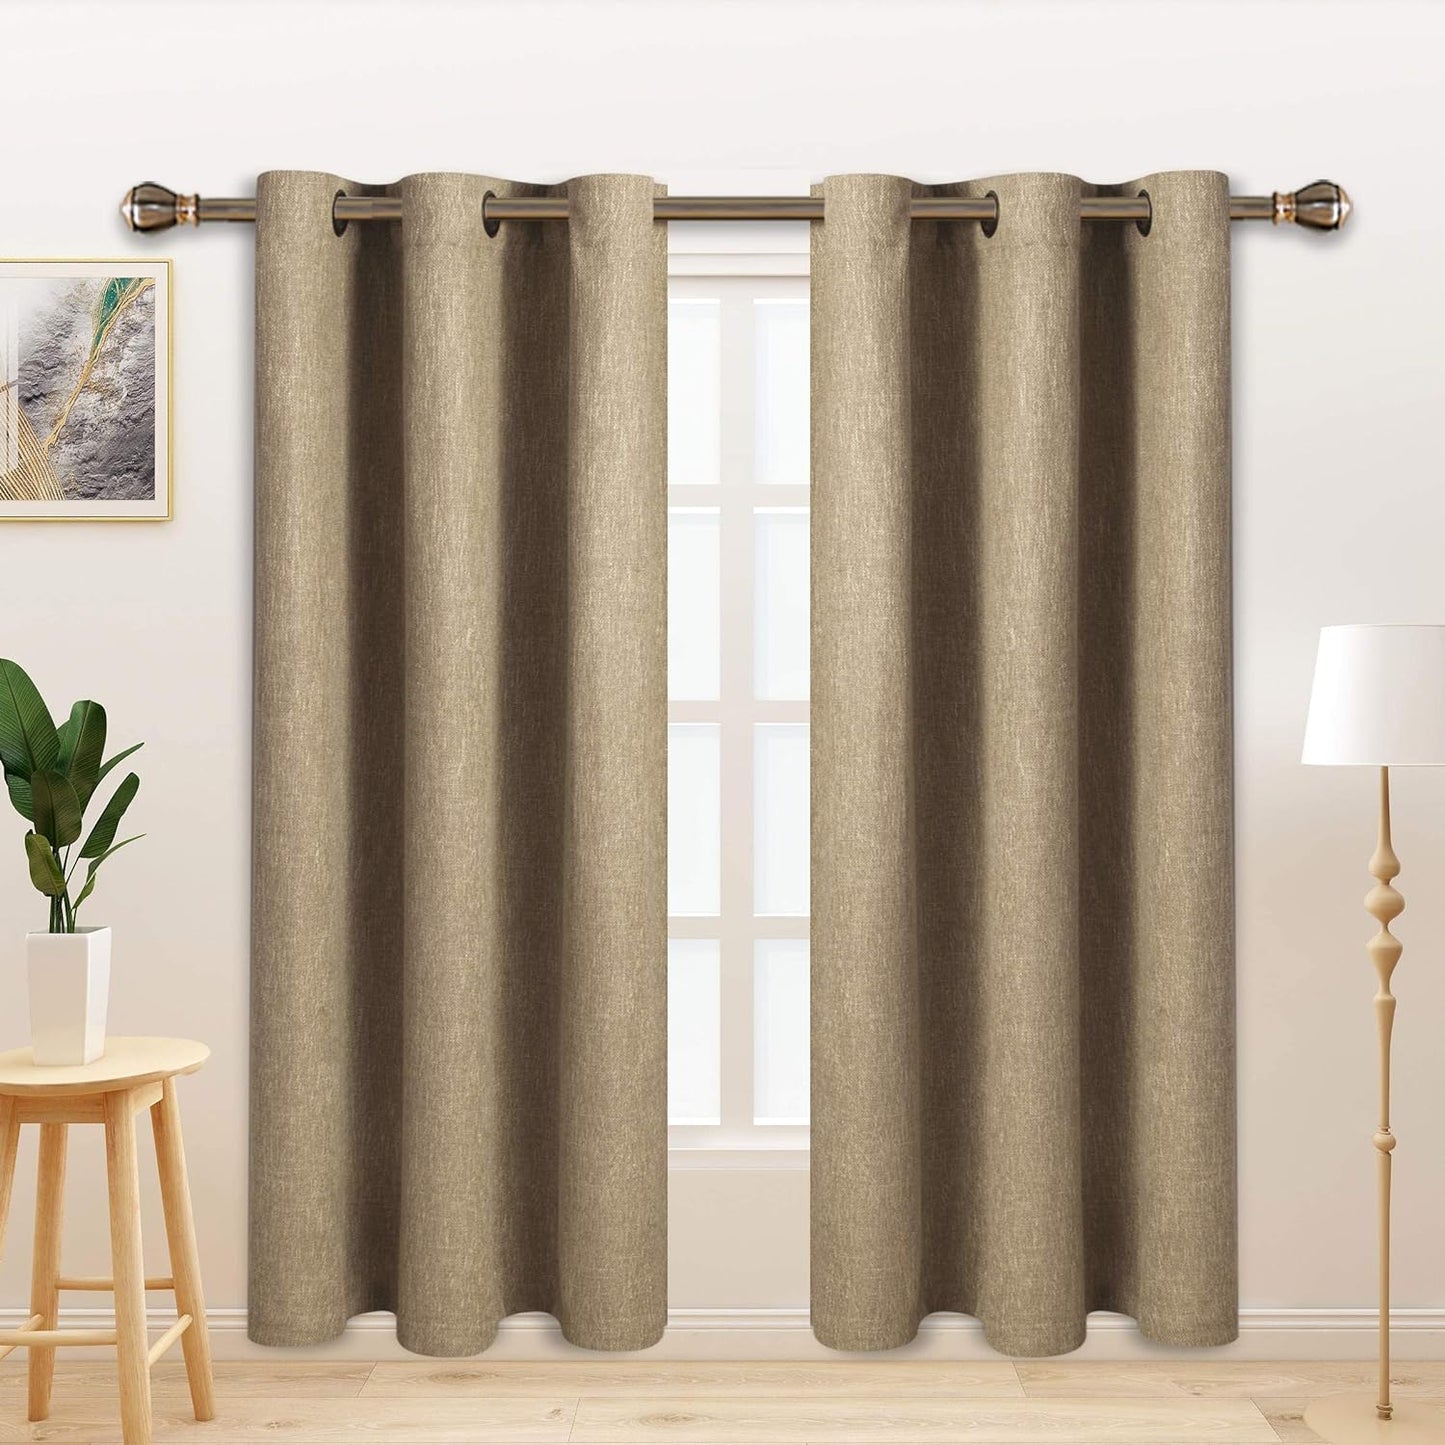 LORDTEX Linen Look Textured Blackout Curtains with Thermal Insulated Liner - Heavy Thick Grommet Window Drapes for Bedroom, 50 X 84 Inches, Ivory, Set of 2 Panels  LORDTEX Tan 40 X 72 Inches 